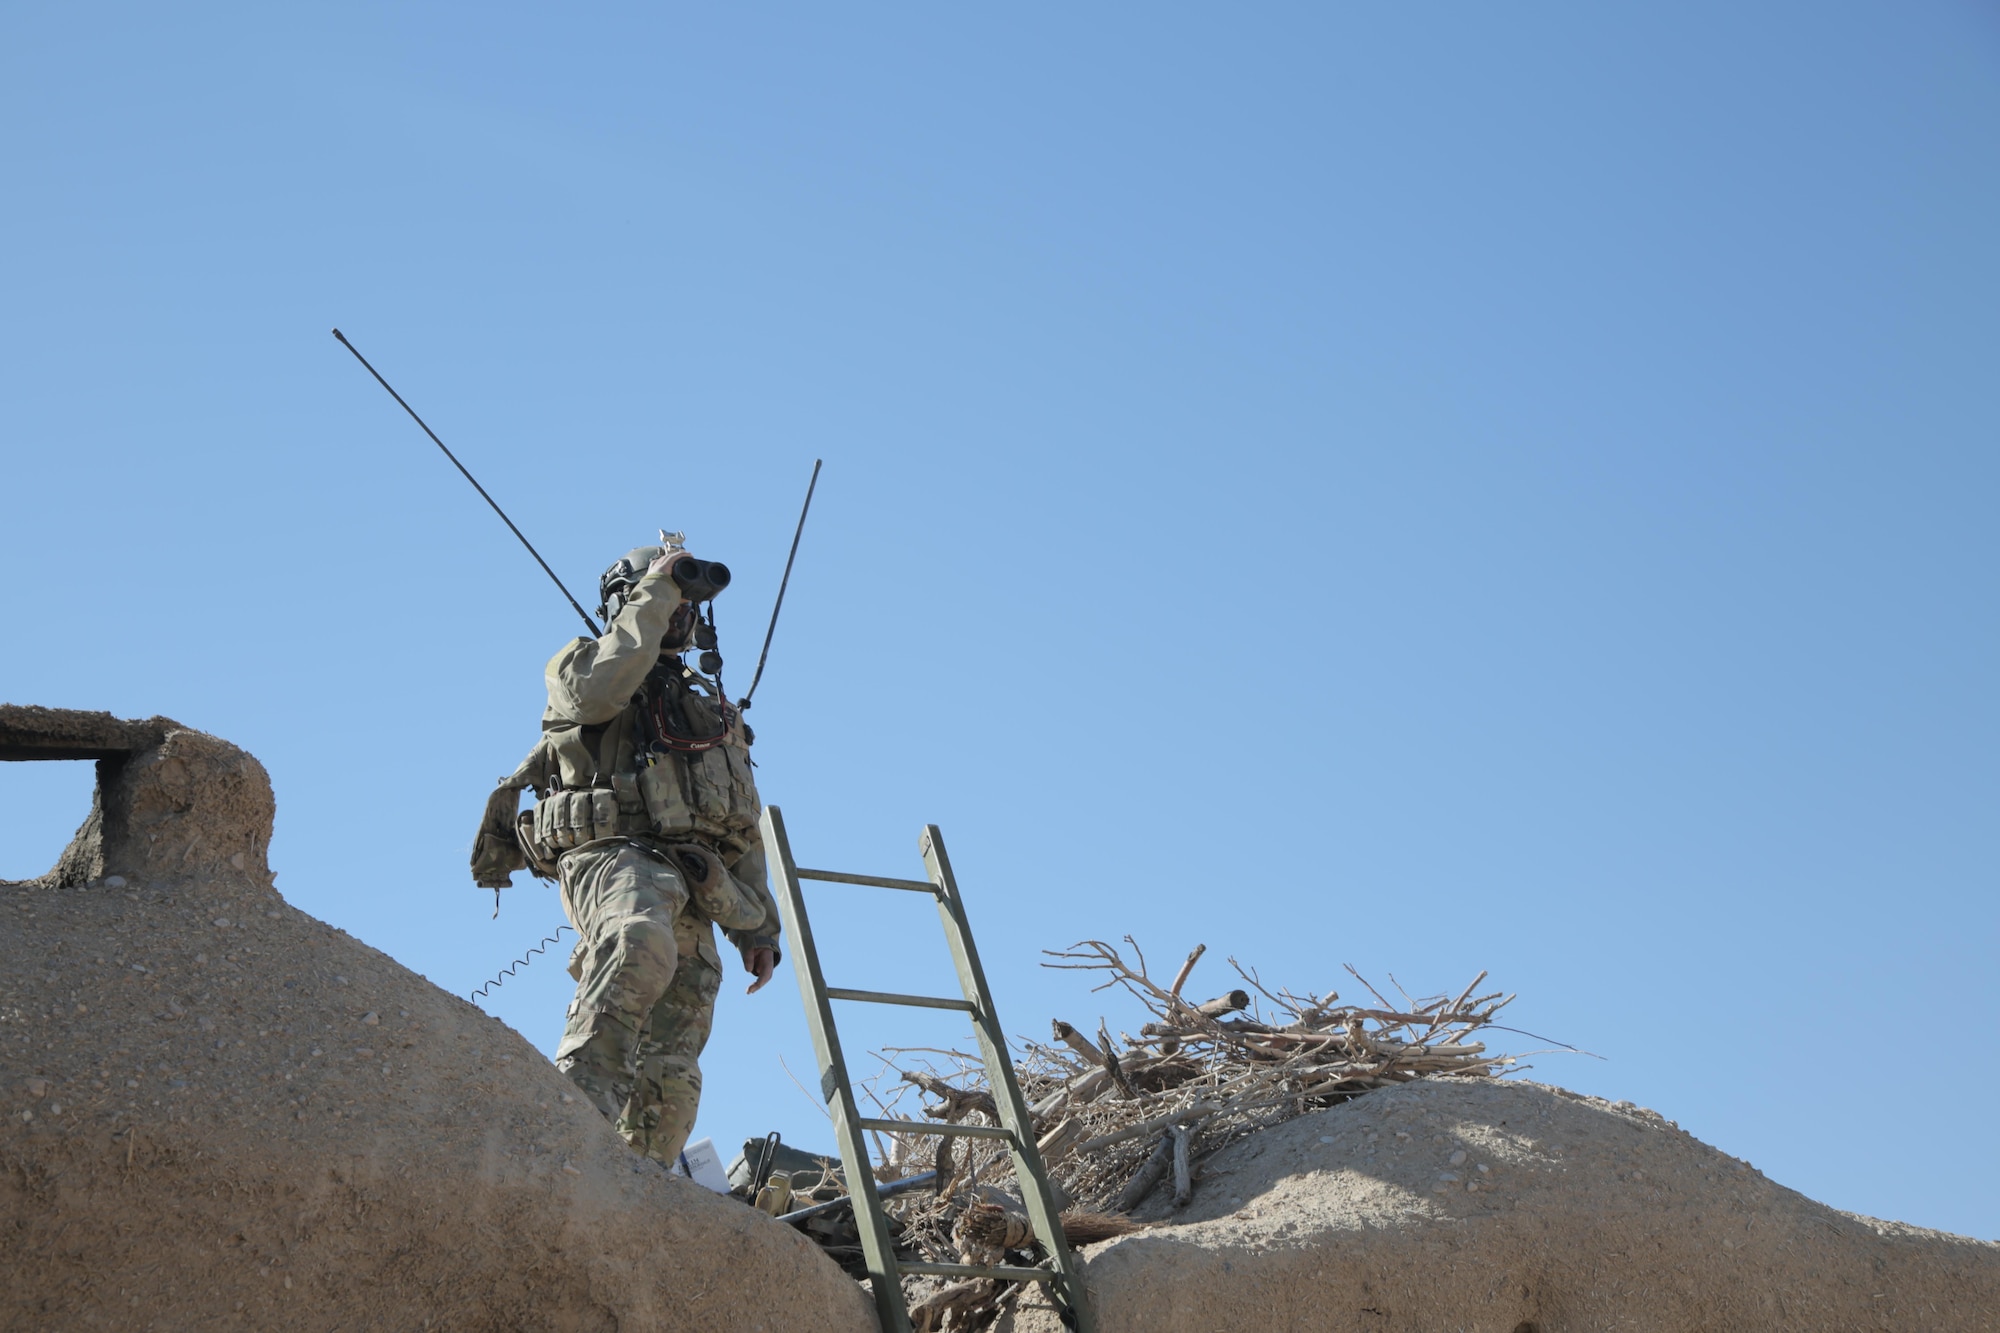 A combat controller, deployed with a U.S. Army Special Forces team in Afghanistan, searches for targets to provide close air support during an engagement with insurgents. A special tactics combat controller integrates air power into ground special operations for mission success, deploying into forward hostile areas to control offensive airstrike operations (also known as joint terminal attack control), as well as establish assault zones and provide air traffic control capability. (U.S. Air Force photo)